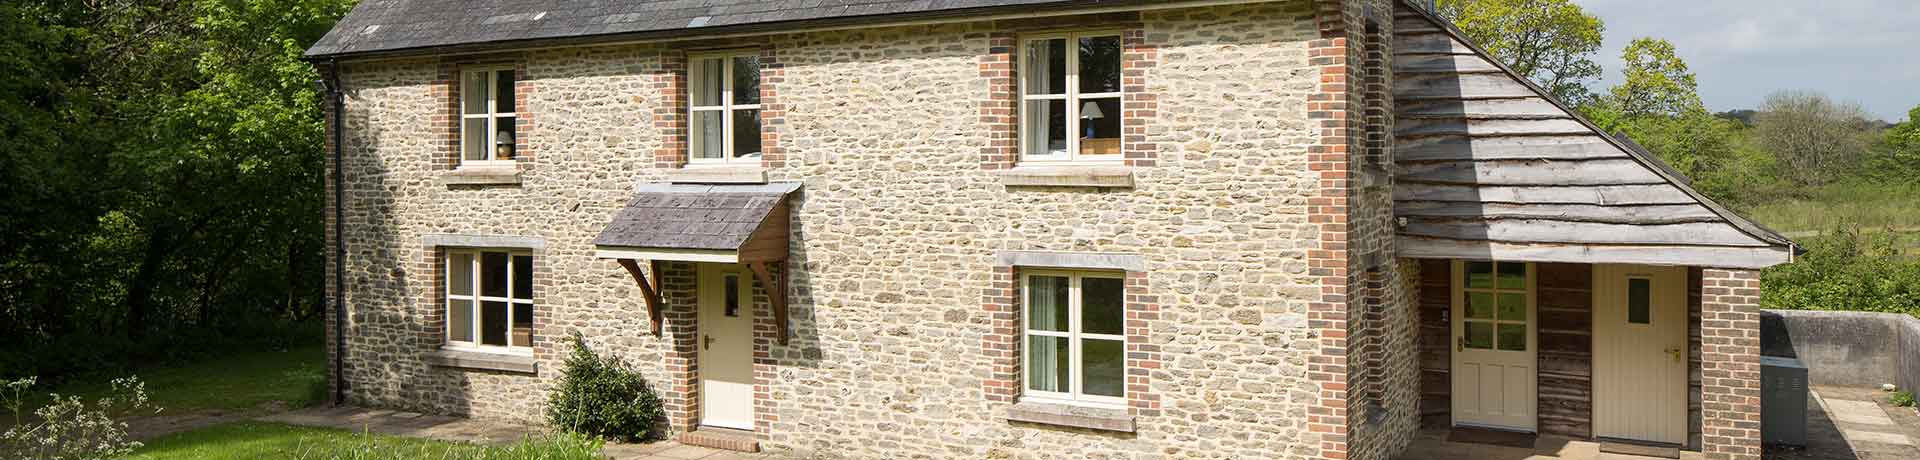 Cottages for 9 people in Wiltshire